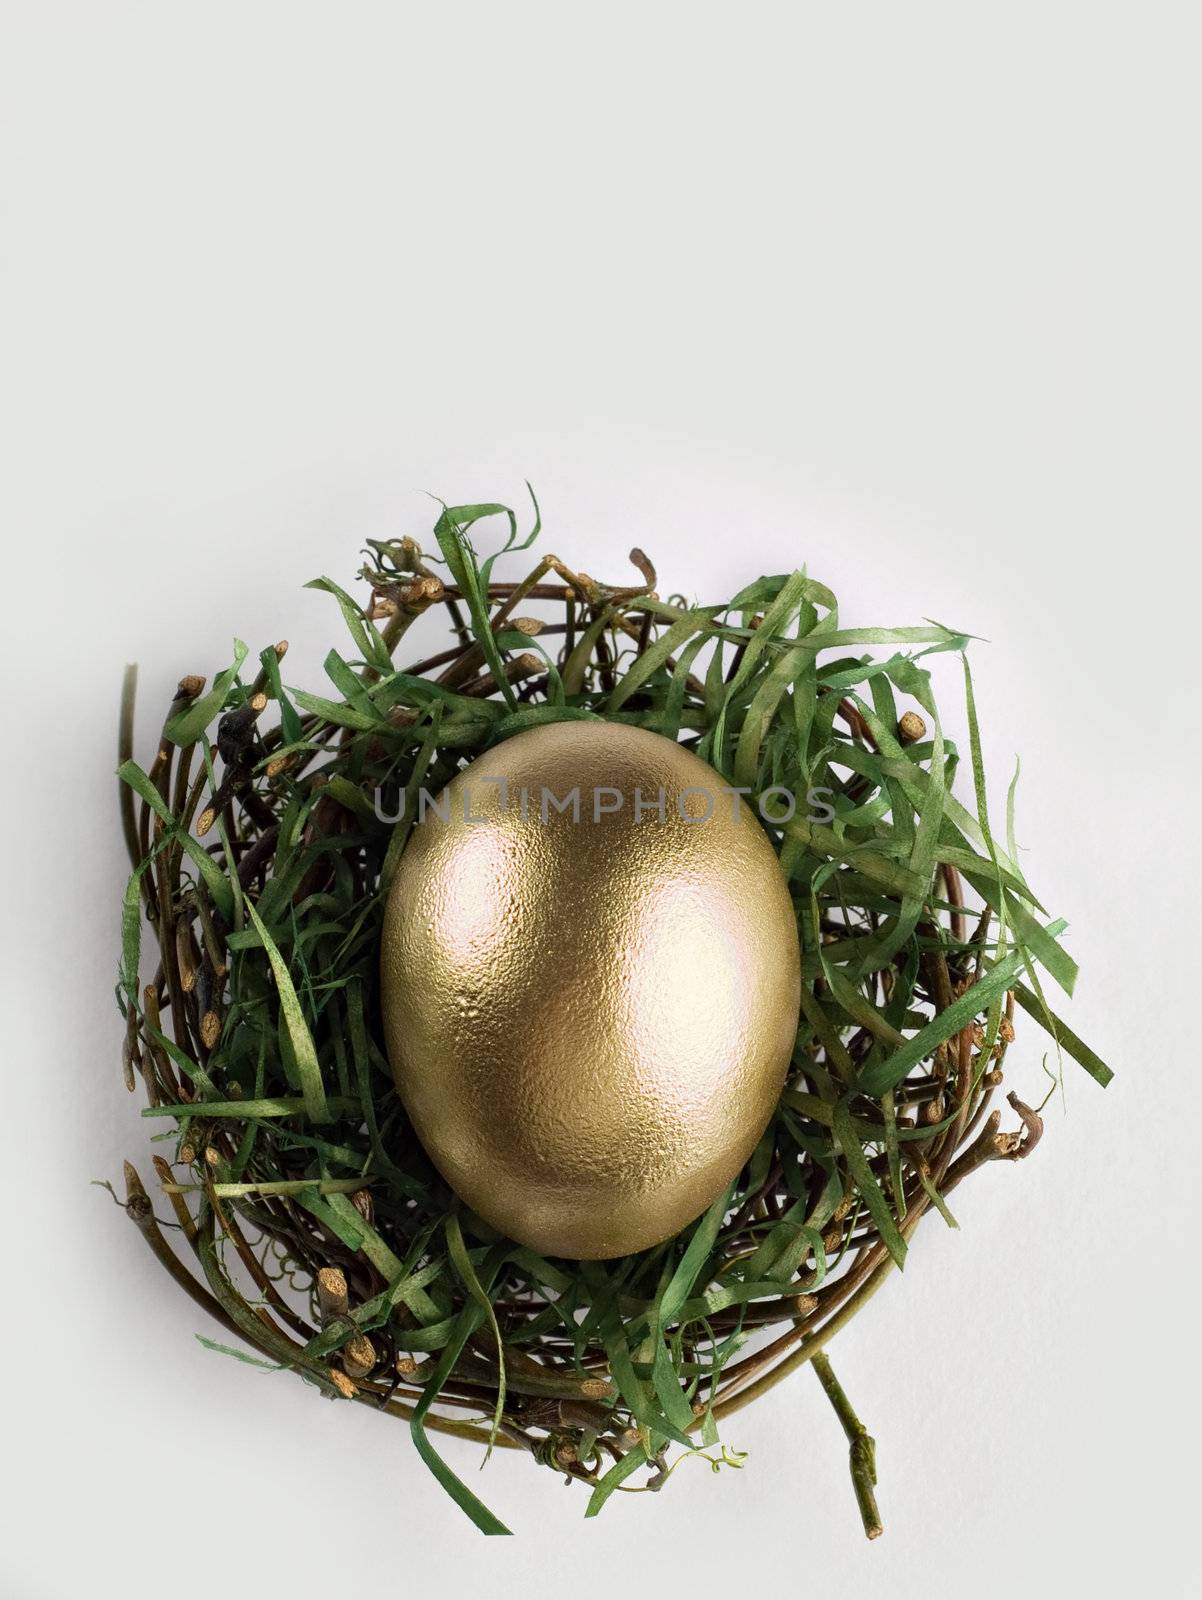 Single golden egg in dried out nest